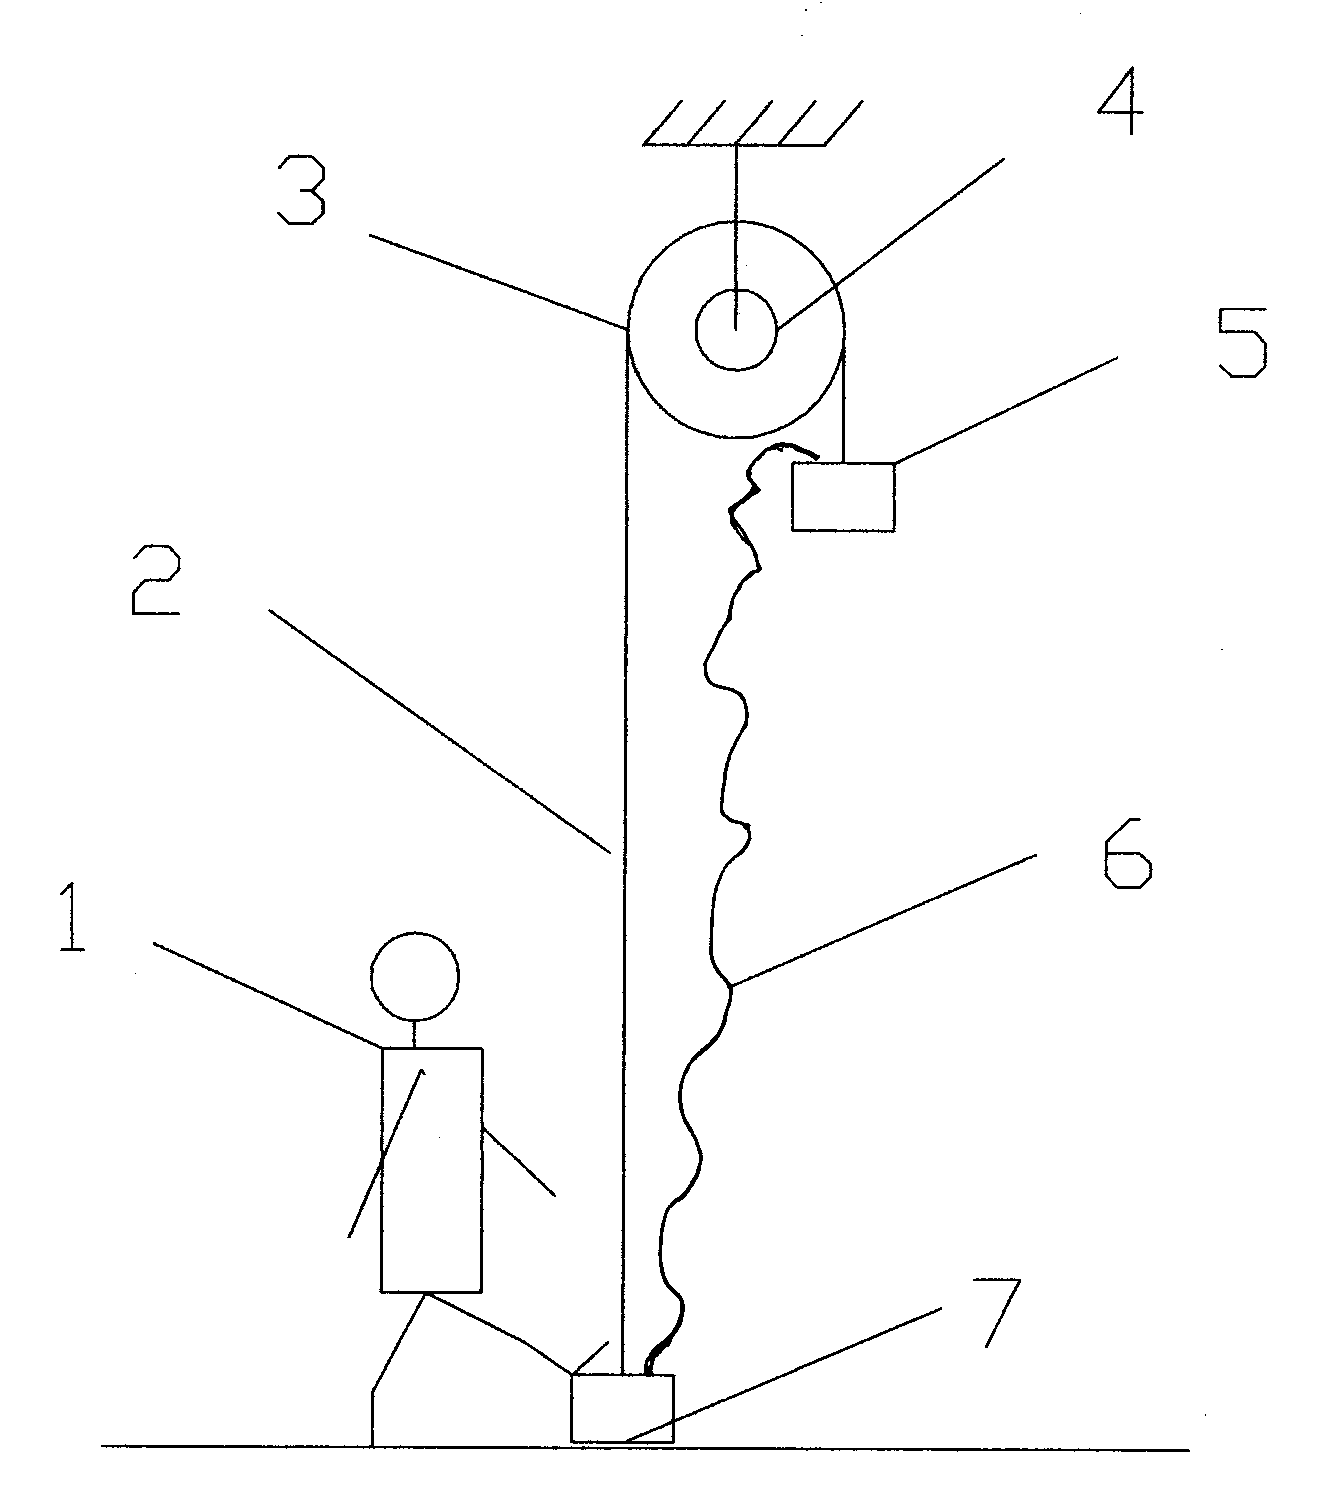 Method for power generation of manpower-driven gravity electric generator